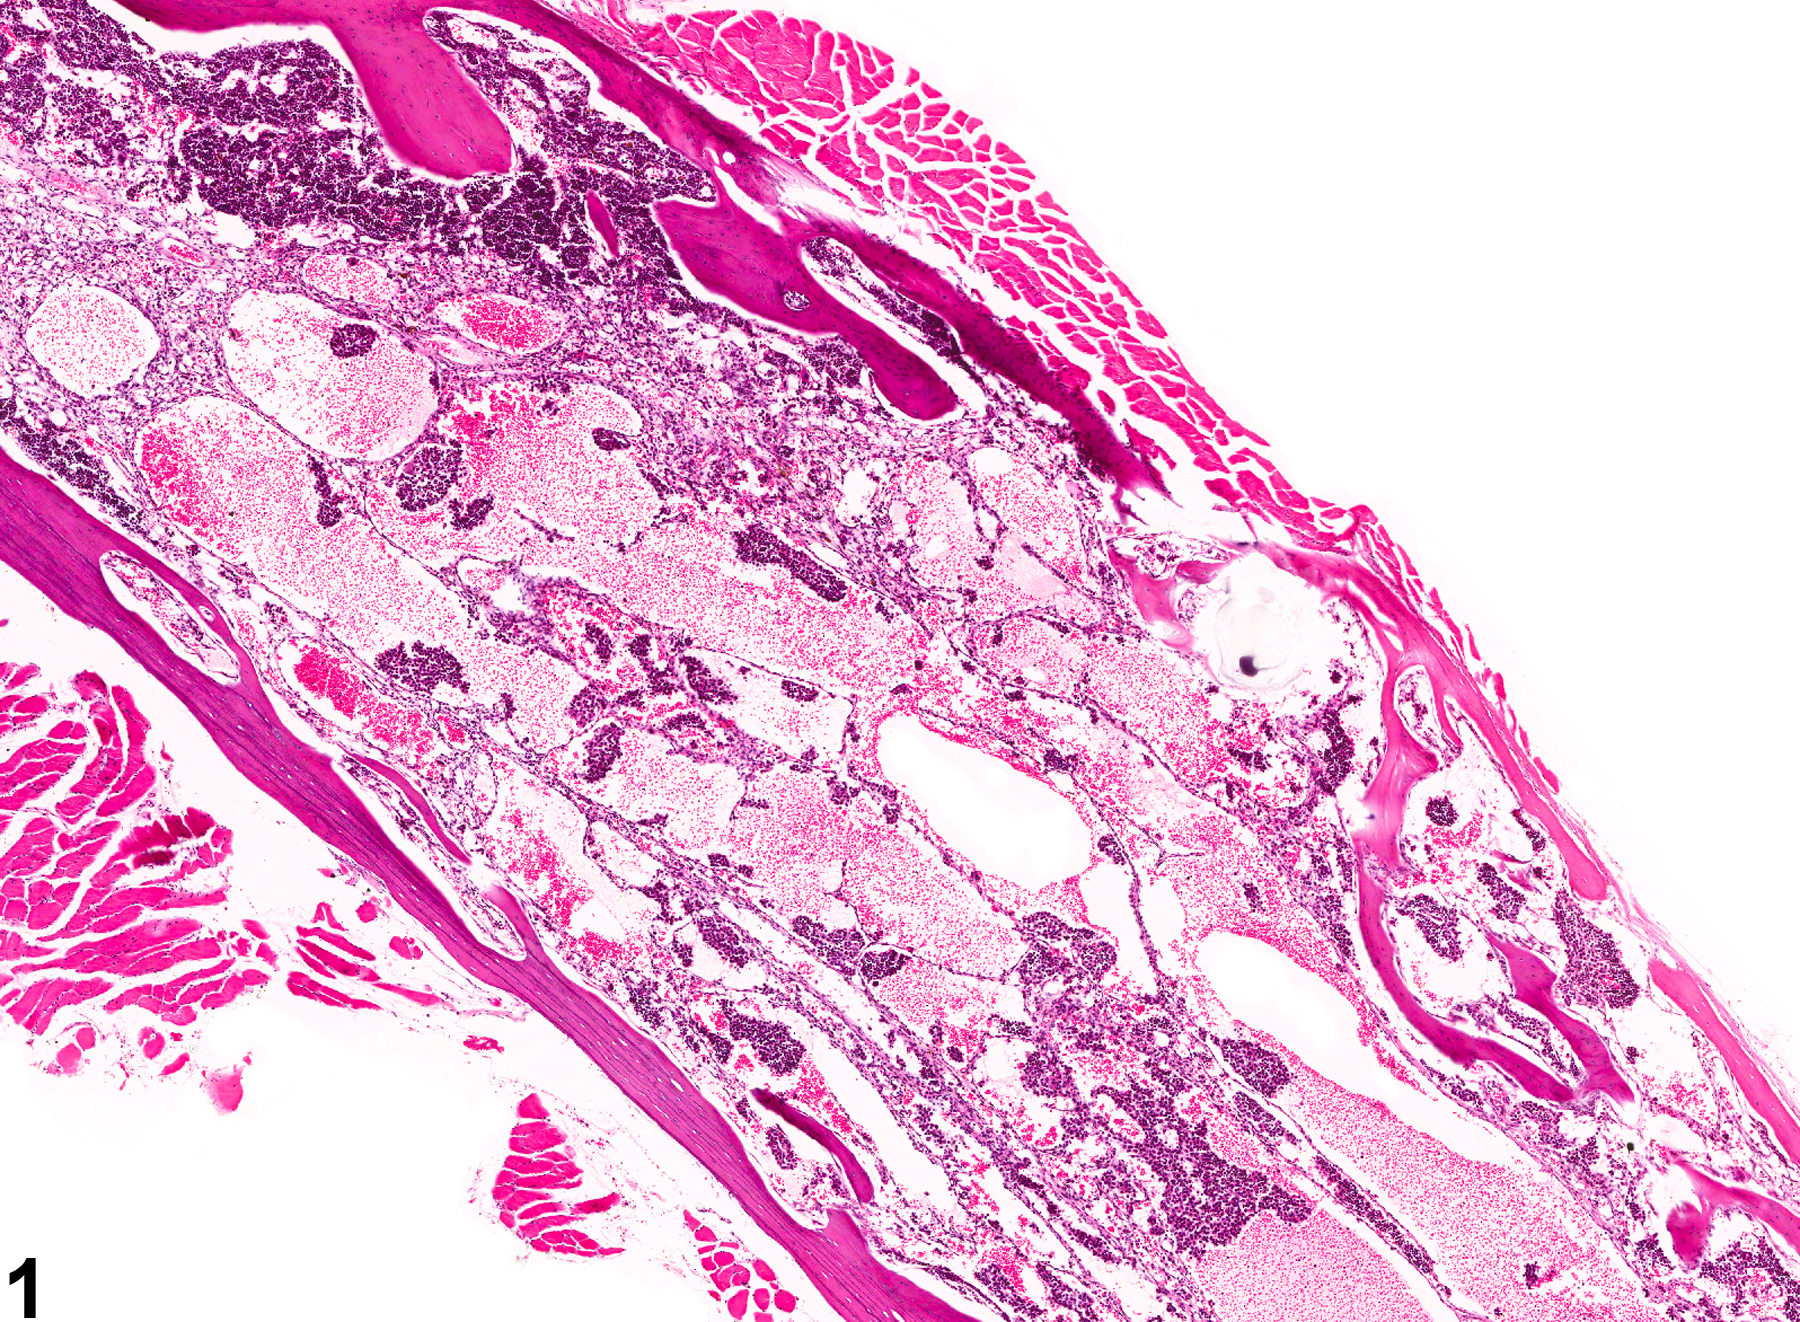 Image of angiectasis in the bone marrow from a female B6C3F1 mouse in a chronic study